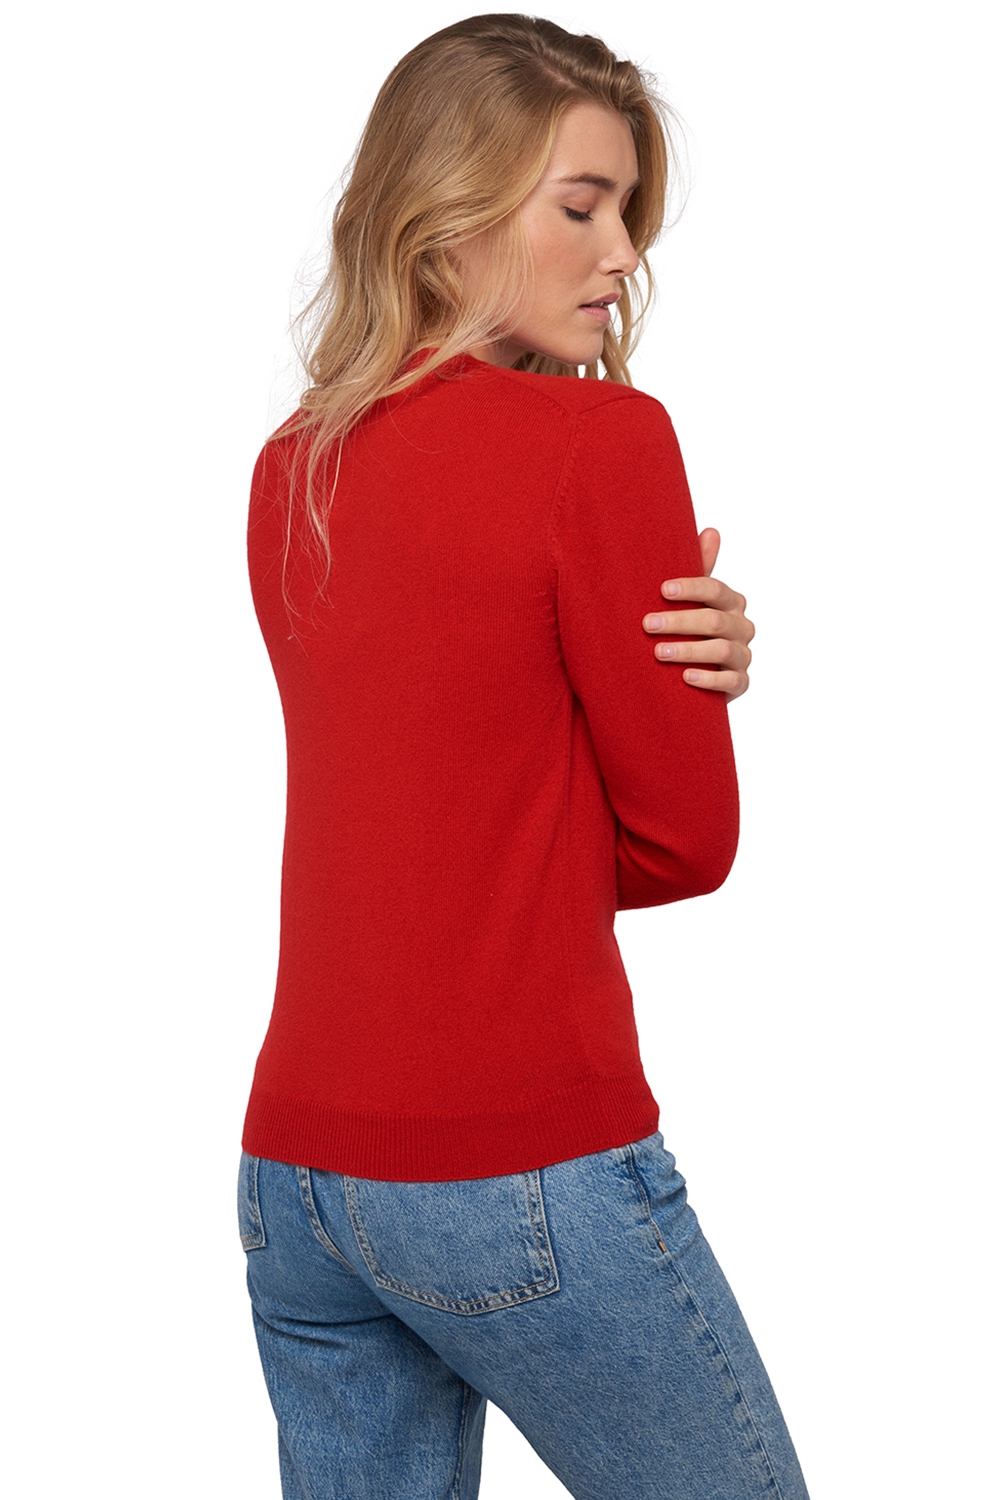 Cachemire pull femme tyra rouge s